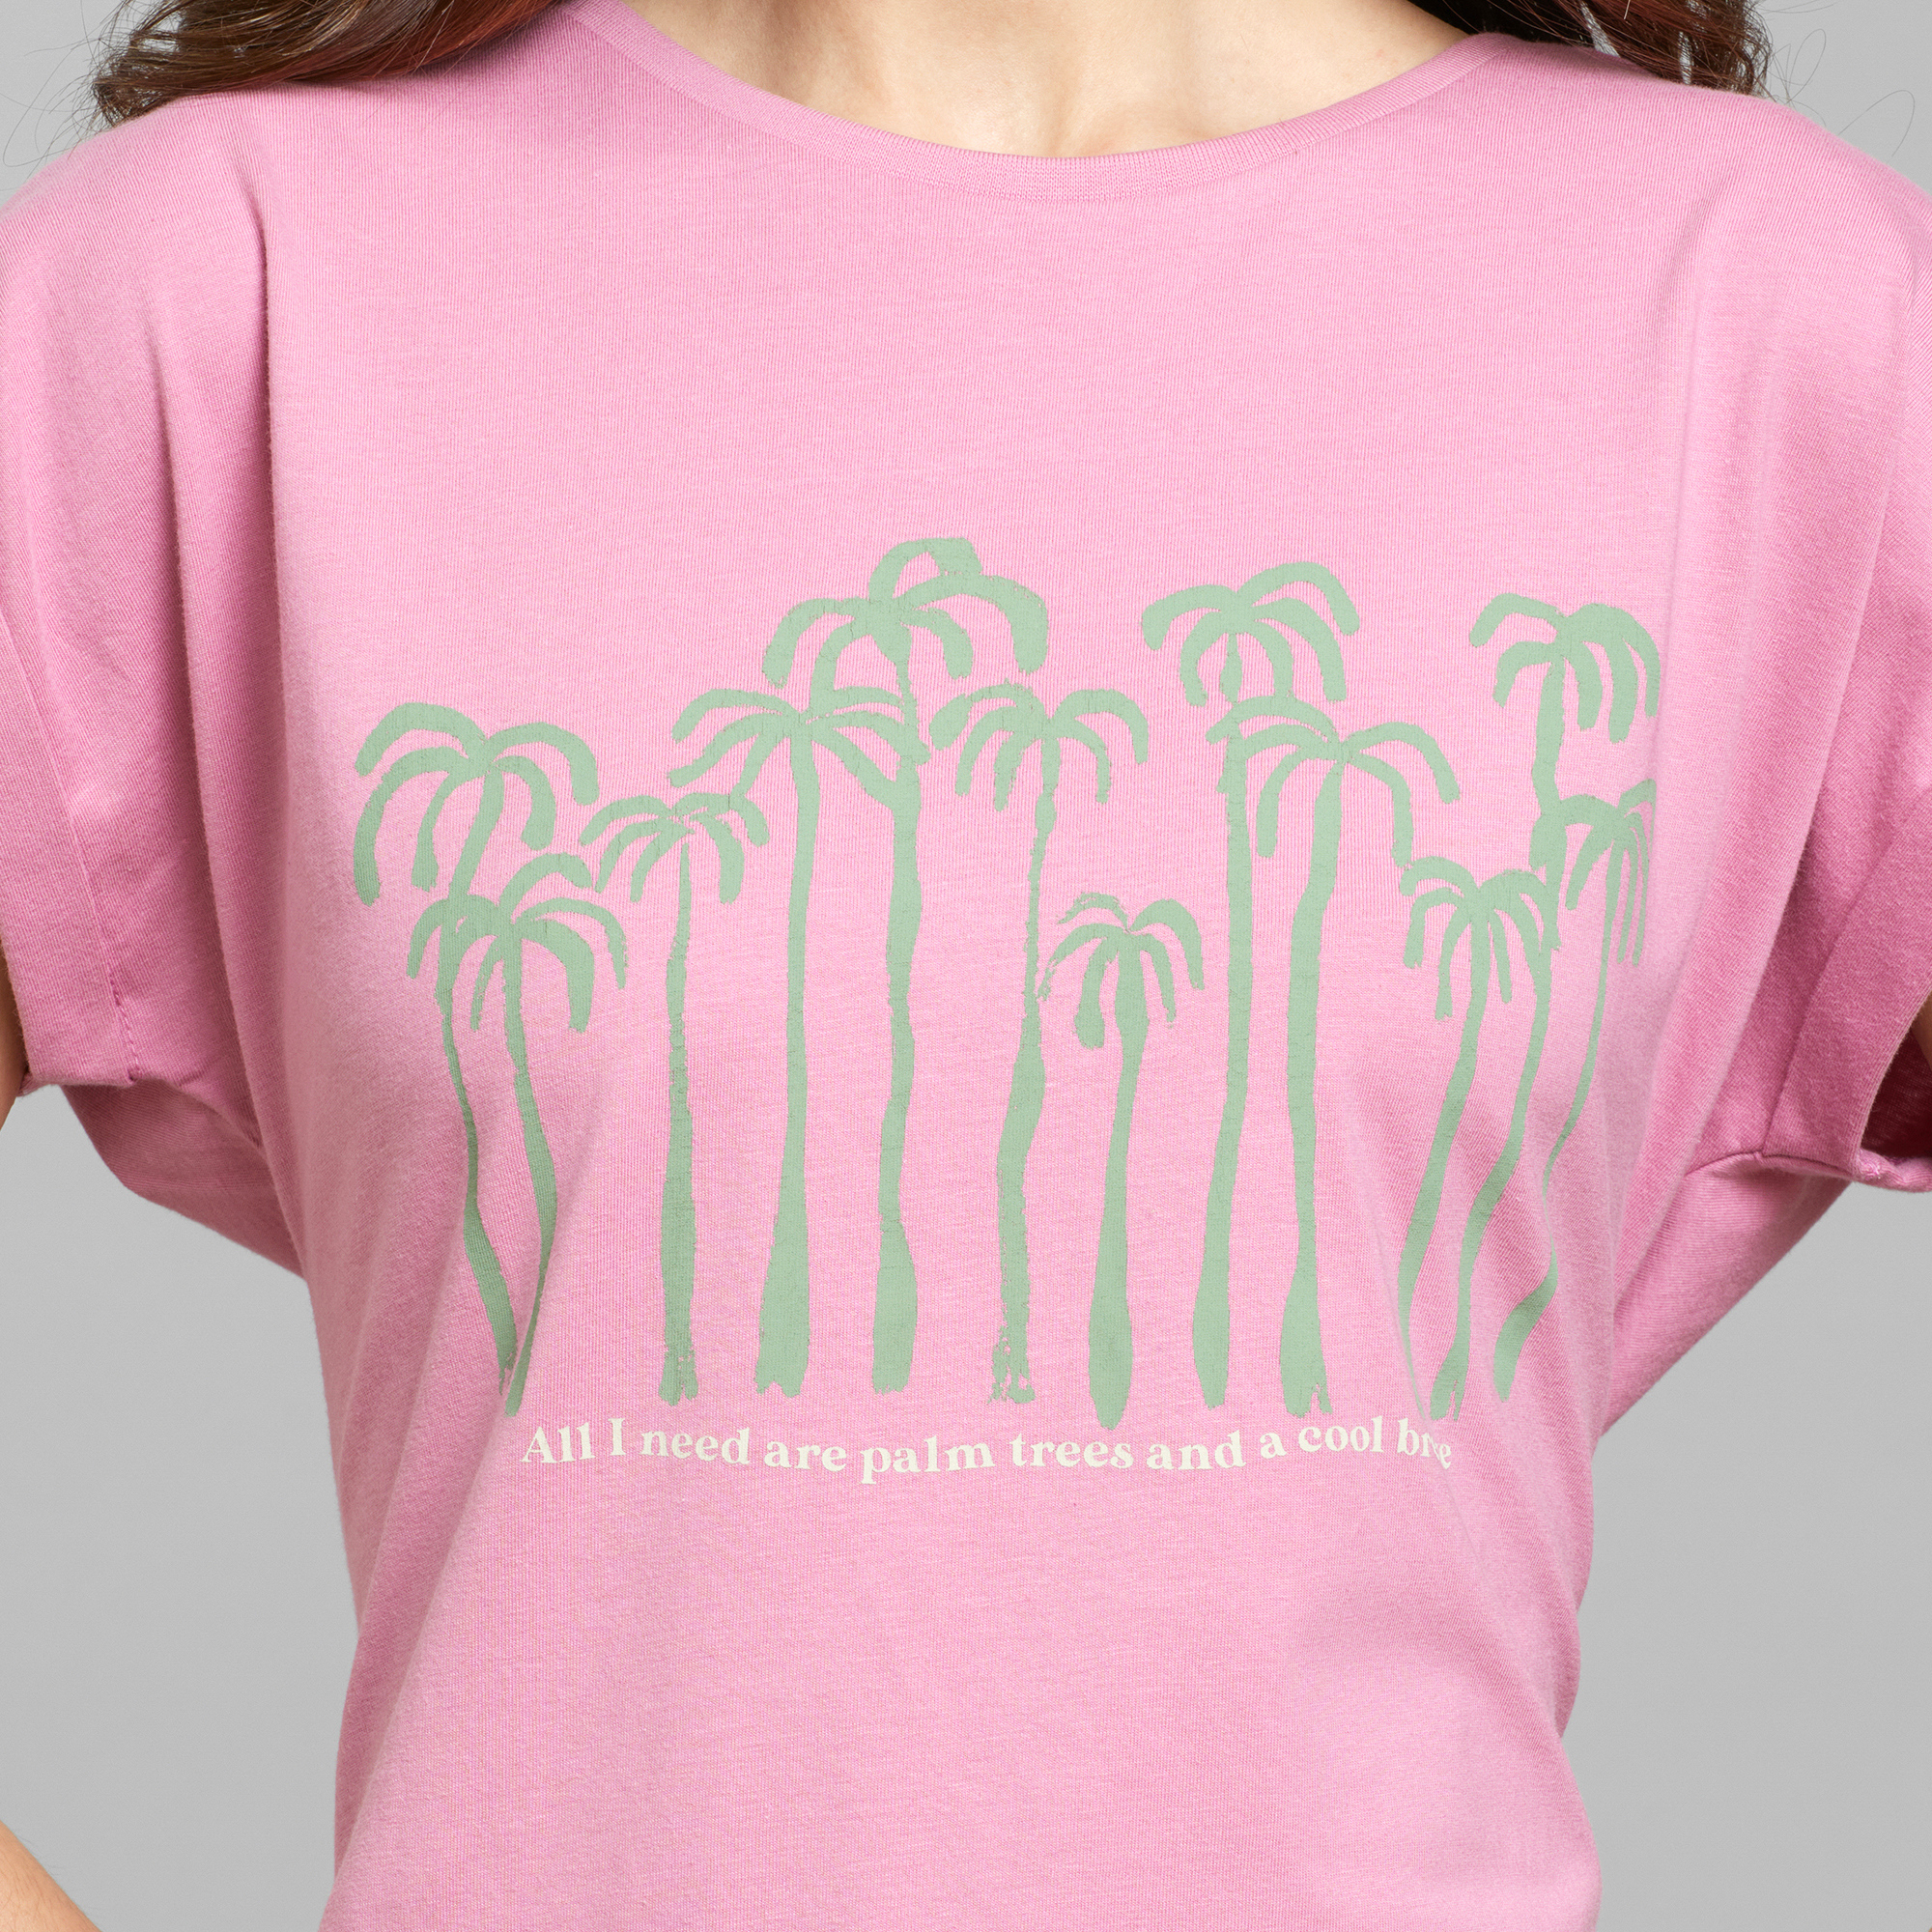 DEDICATED-PALM-ROW-VISBY-T-Shirt-cashmere-pink1